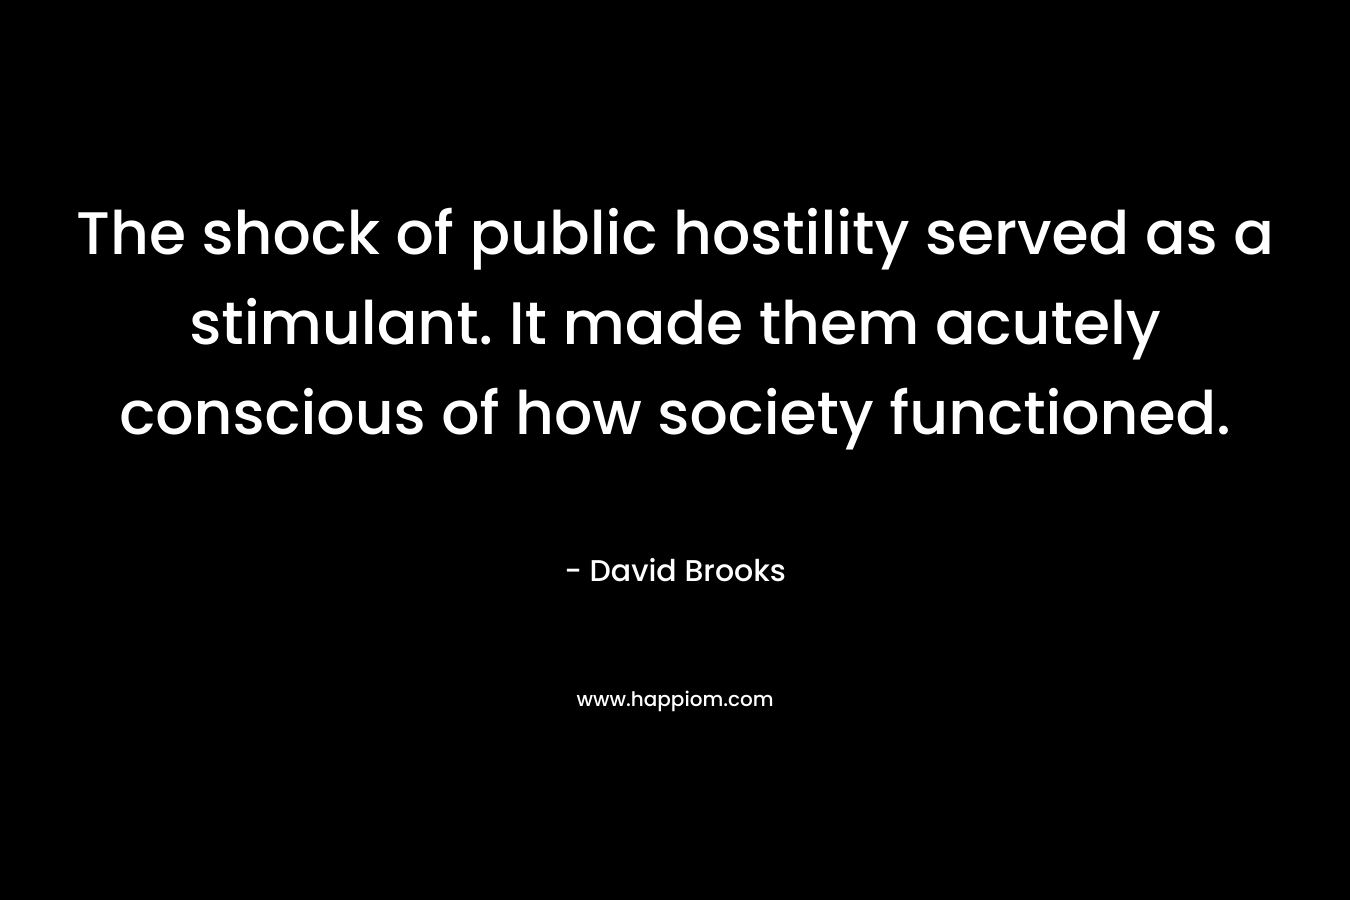 The shock of public hostility served as a stimulant. It made them acutely conscious of how society functioned.